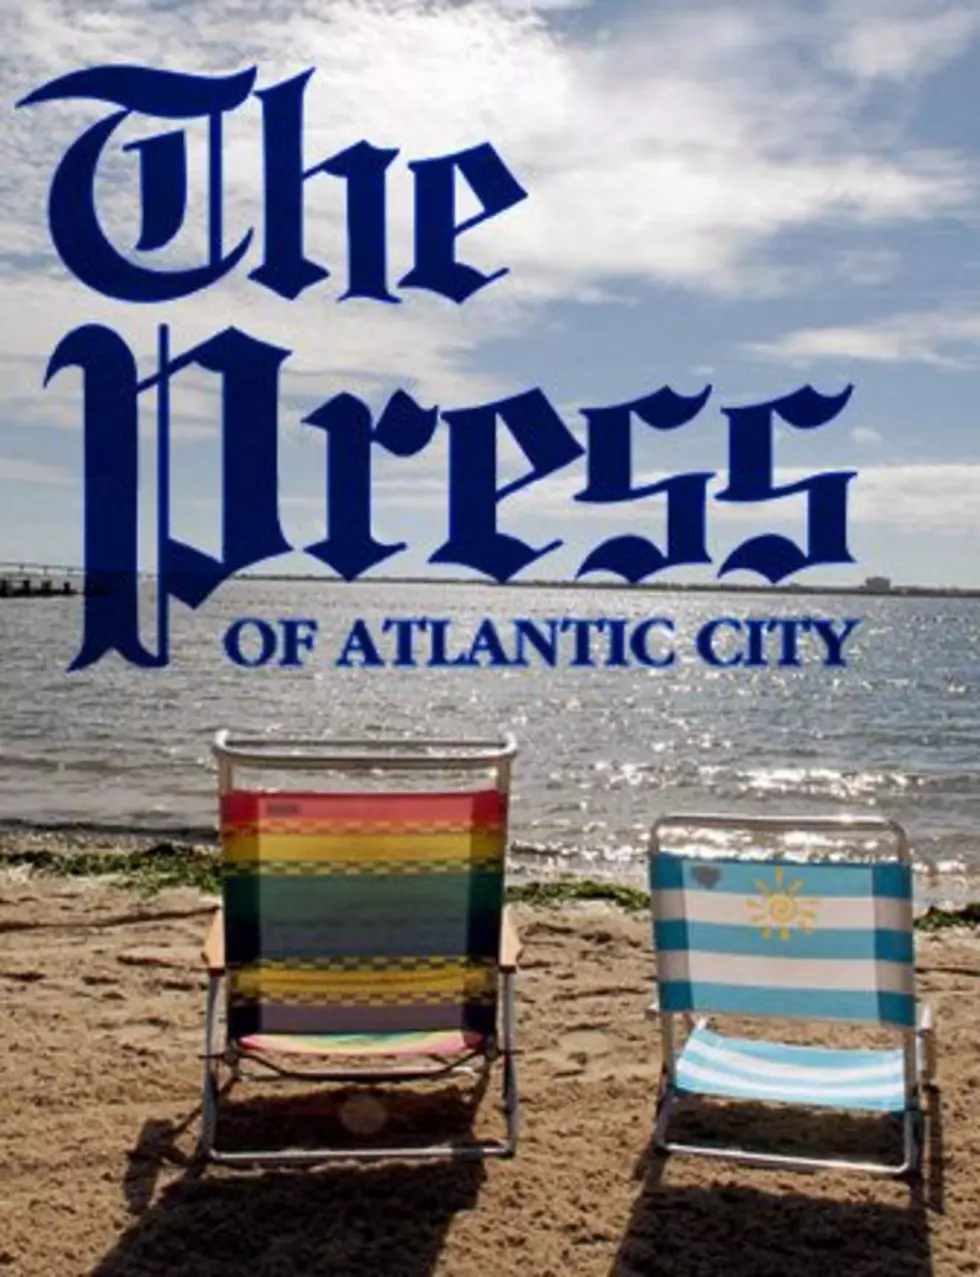 The Press of Atlantic City is Up For Sale